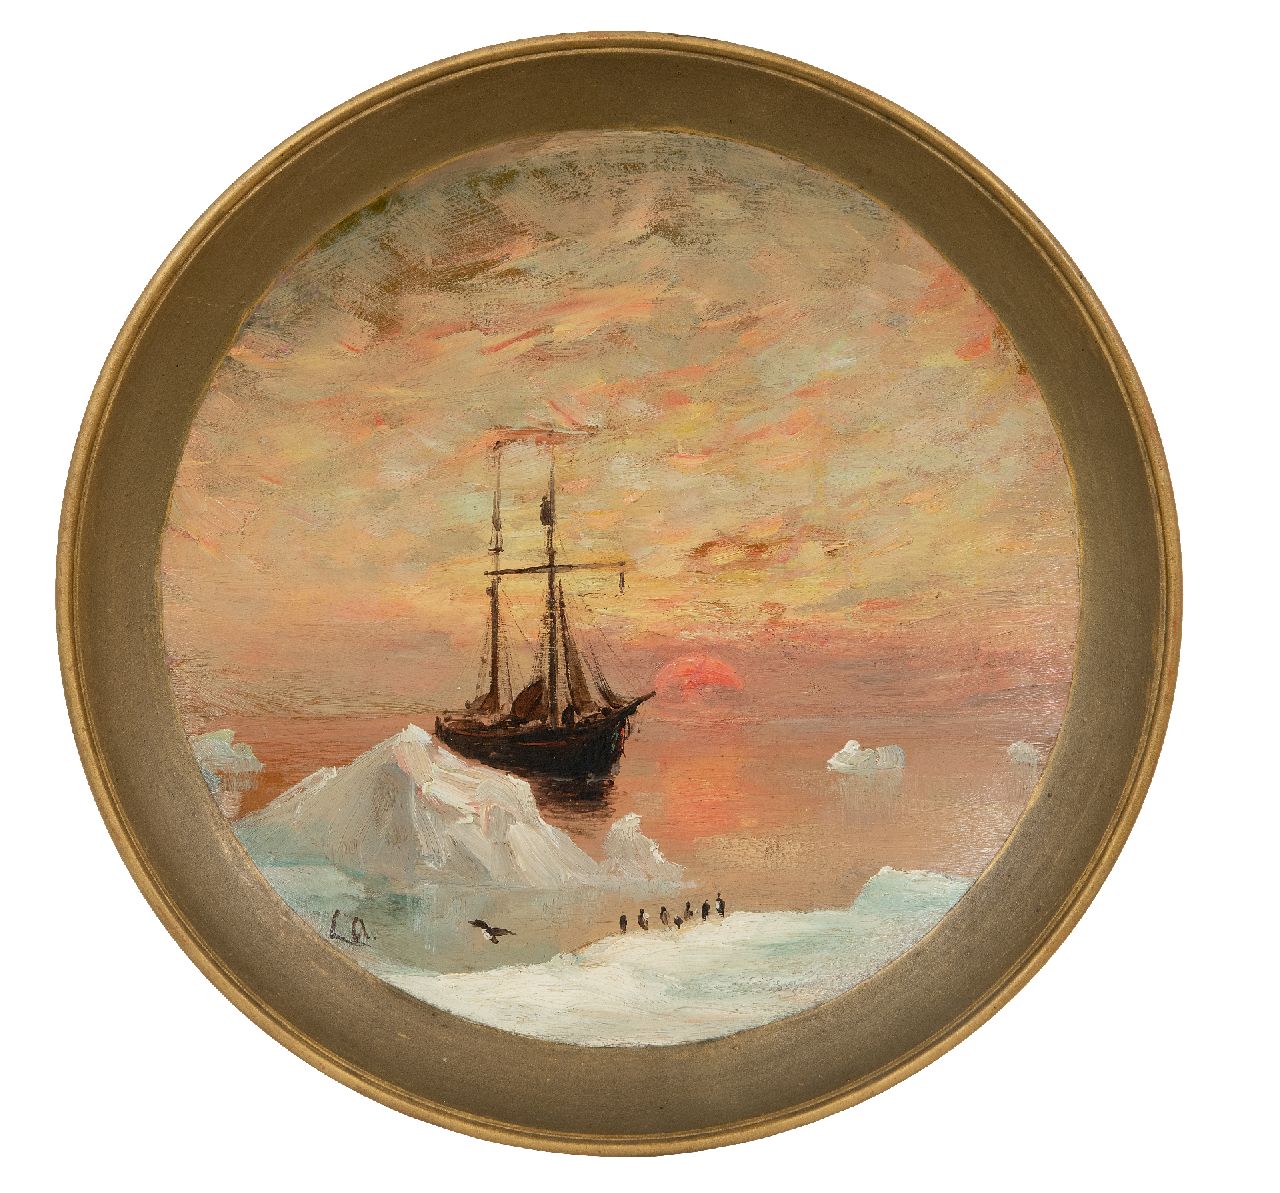 Apol L.F.H.  | Lodewijk Franciscus Hendrik 'Louis' Apol | Sculptures and objects offered for sale | The Willem Barentsz on Nova Zembla at sunset, oil on ceramic, signed l.l. with initials